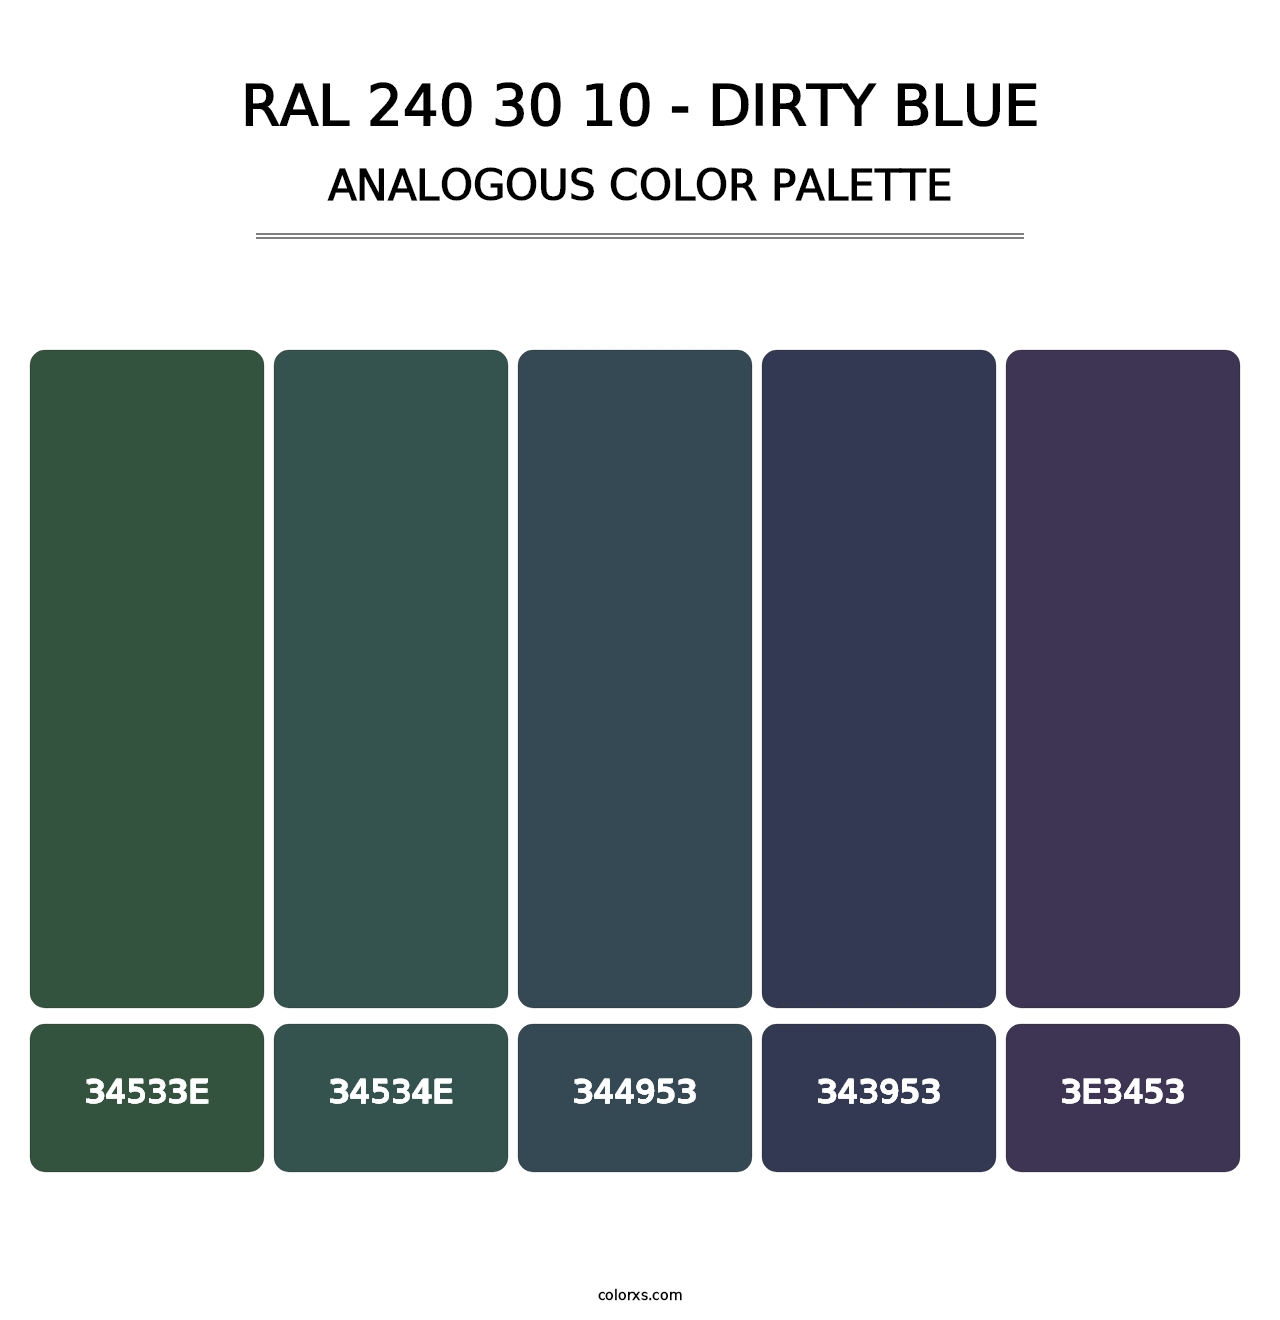 RAL 240 30 10 - Dirty Blue - Analogous Color Palette